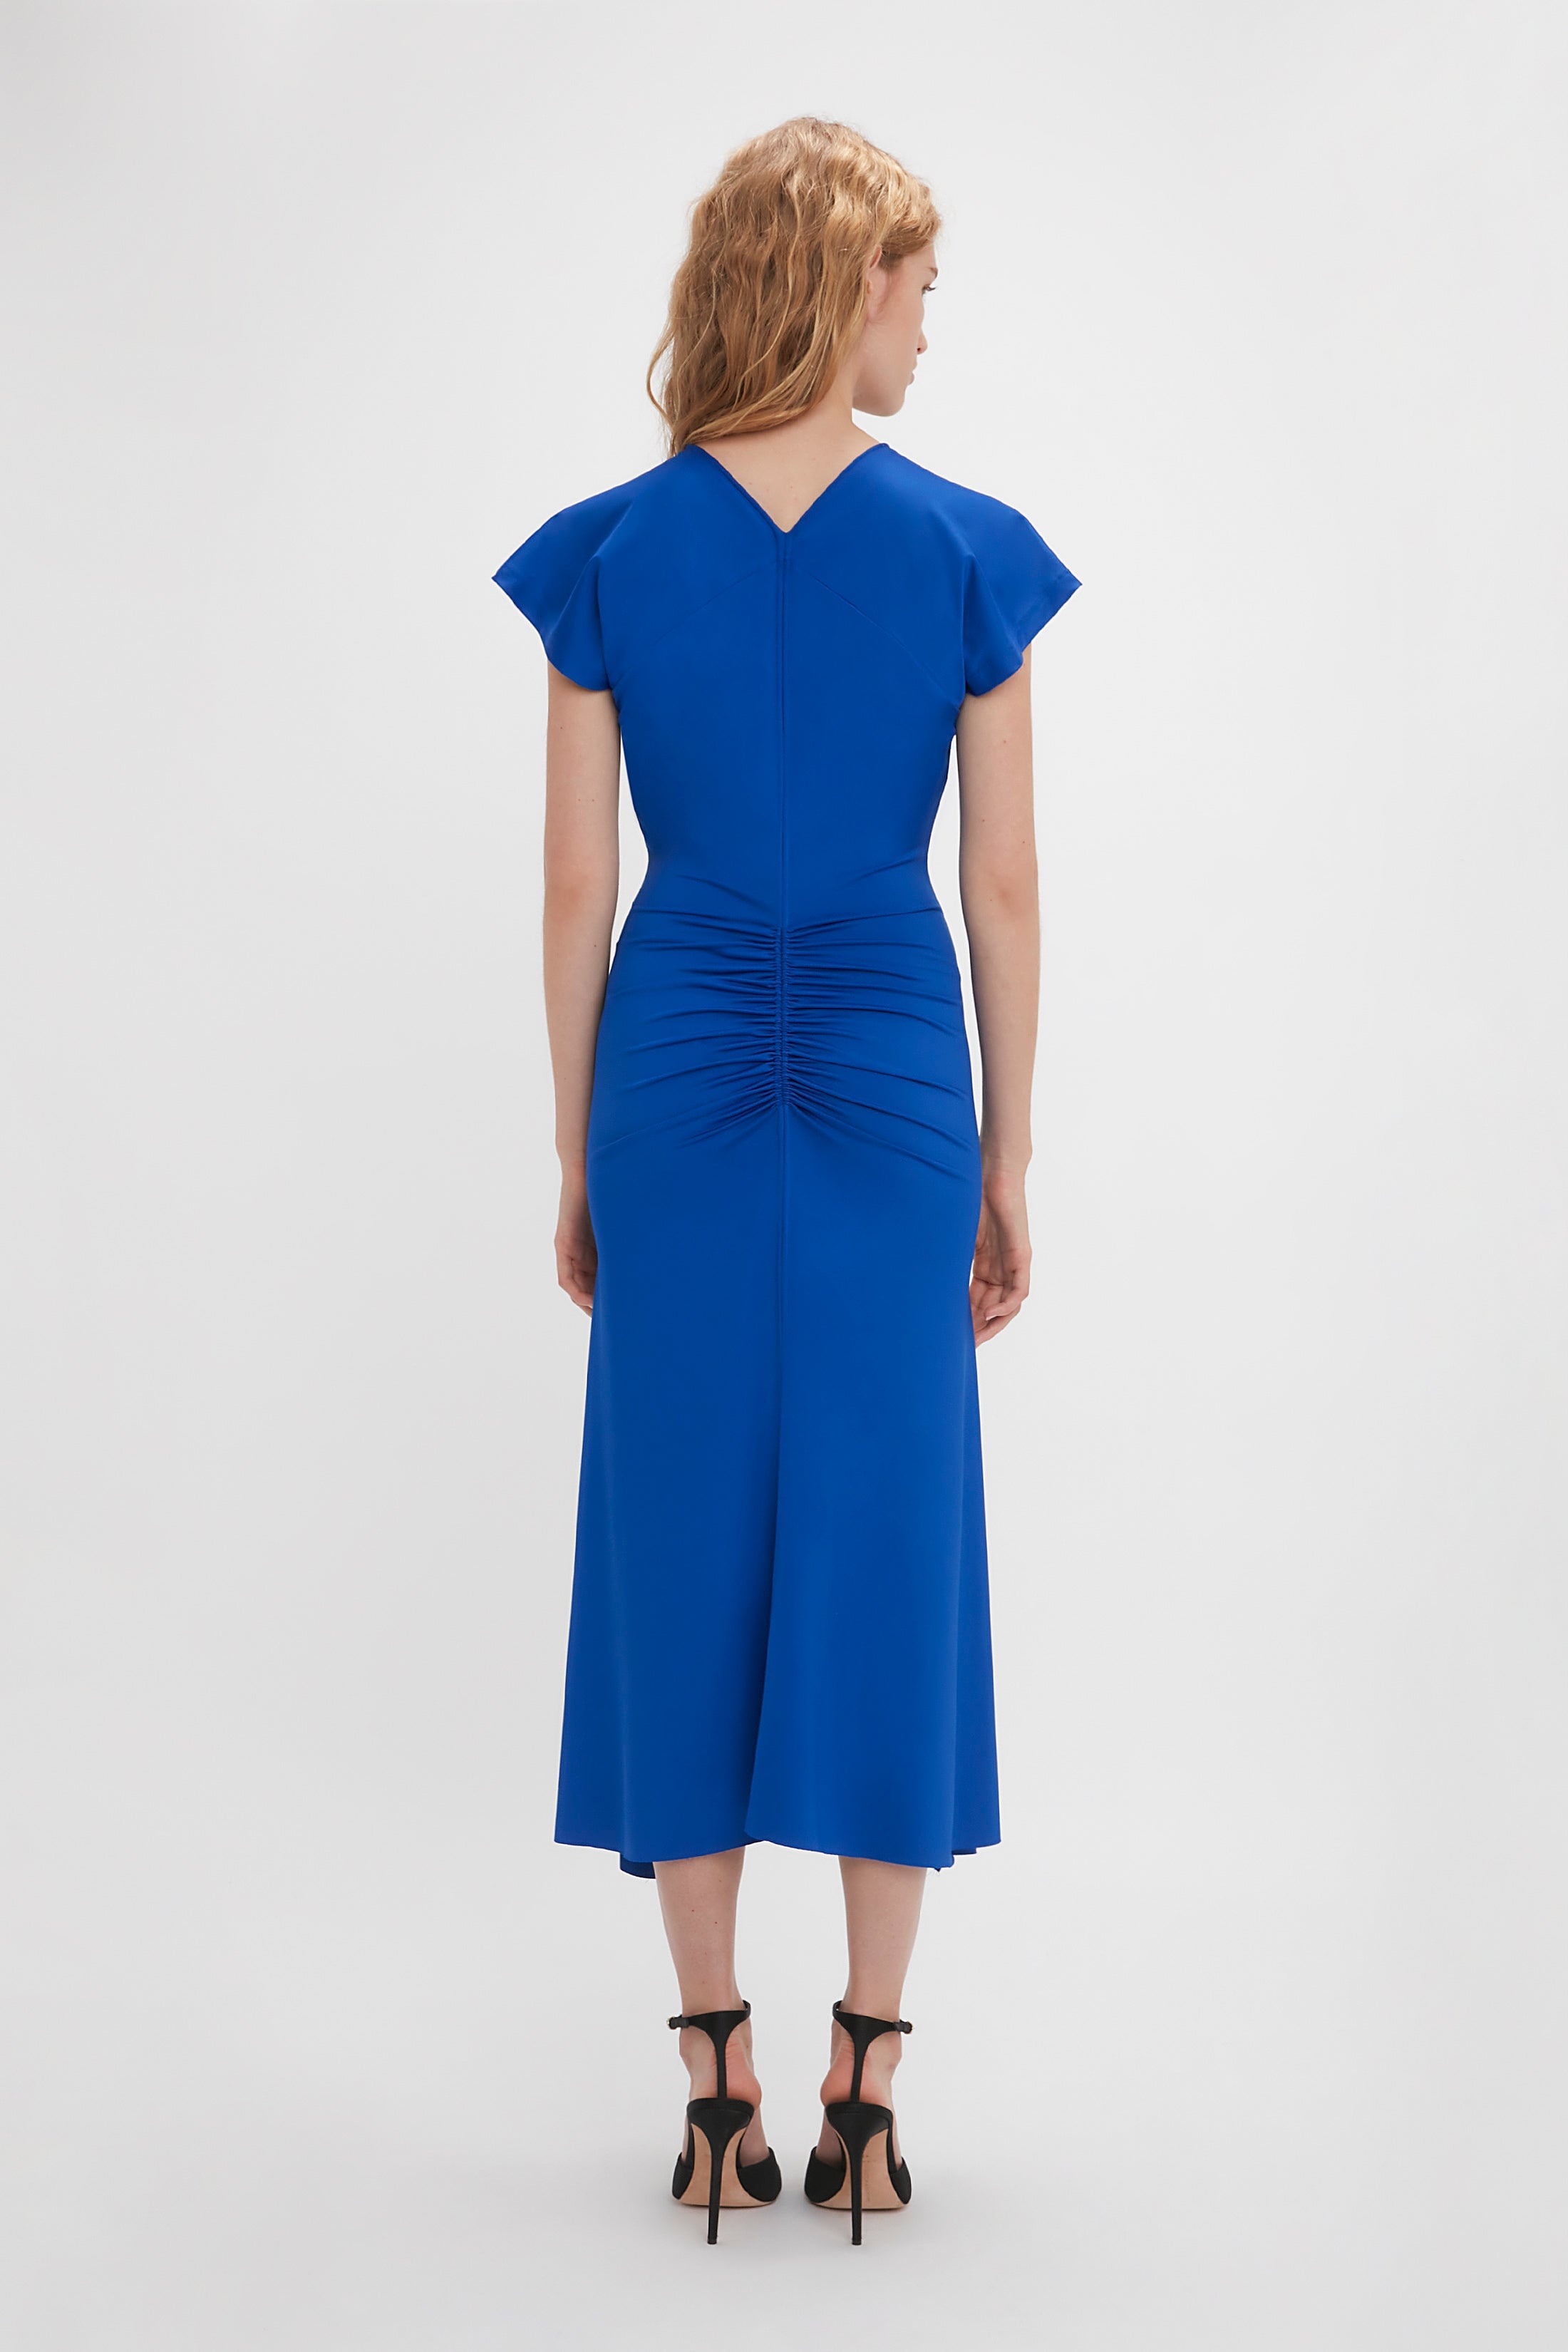 Sleeveless Rouched Jersey Dress In Royal Blue - 4